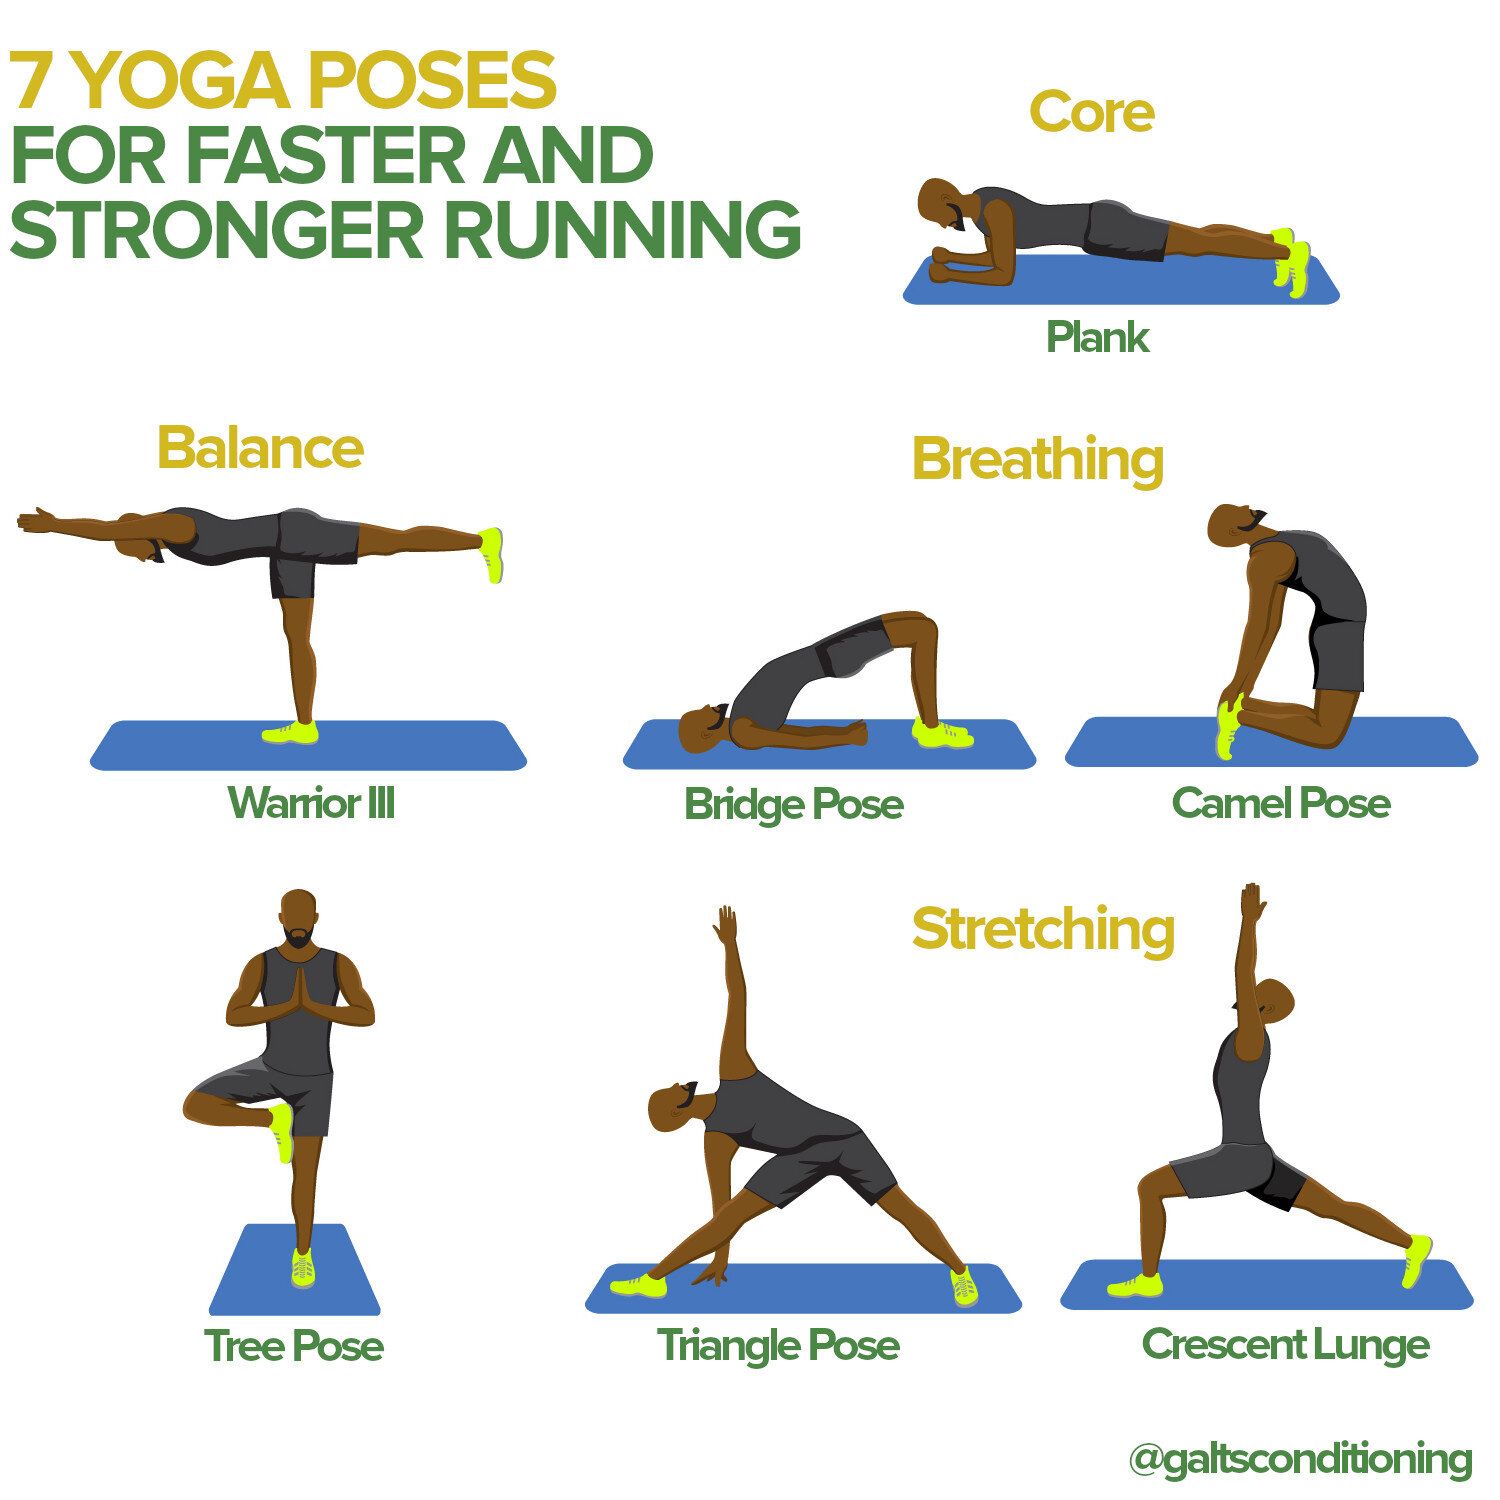 Marathon Cross-Training: Run Stronger And Faster With These 7 Yoga Poses